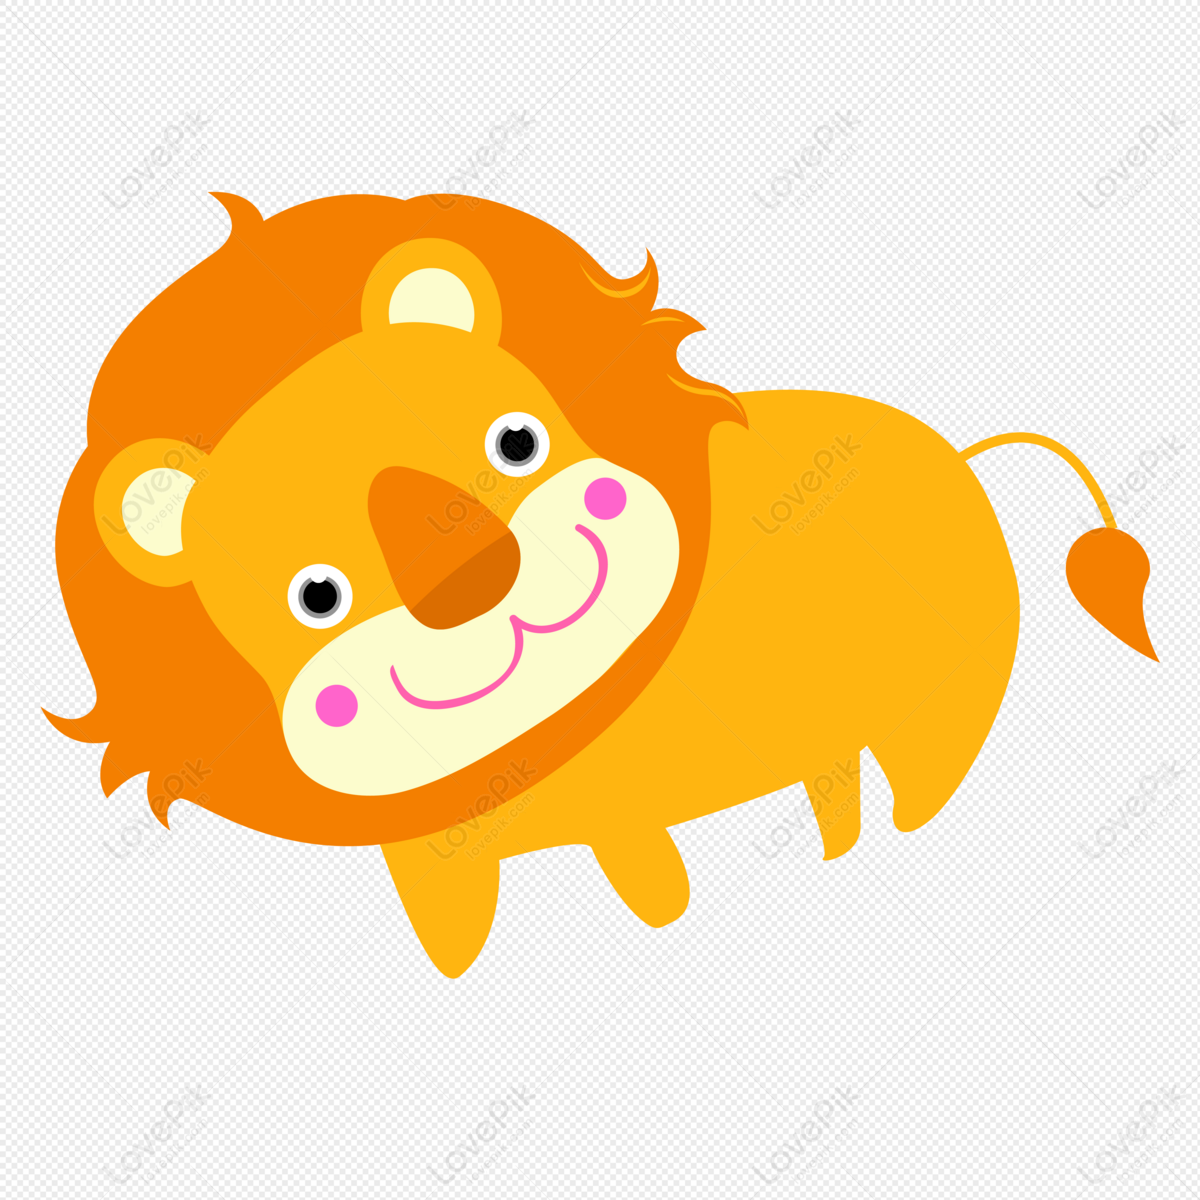 Lion Animal Cartoon Lion PNG Transparent Background And Clipart Image For Free  Download - Lovepik | 401422780